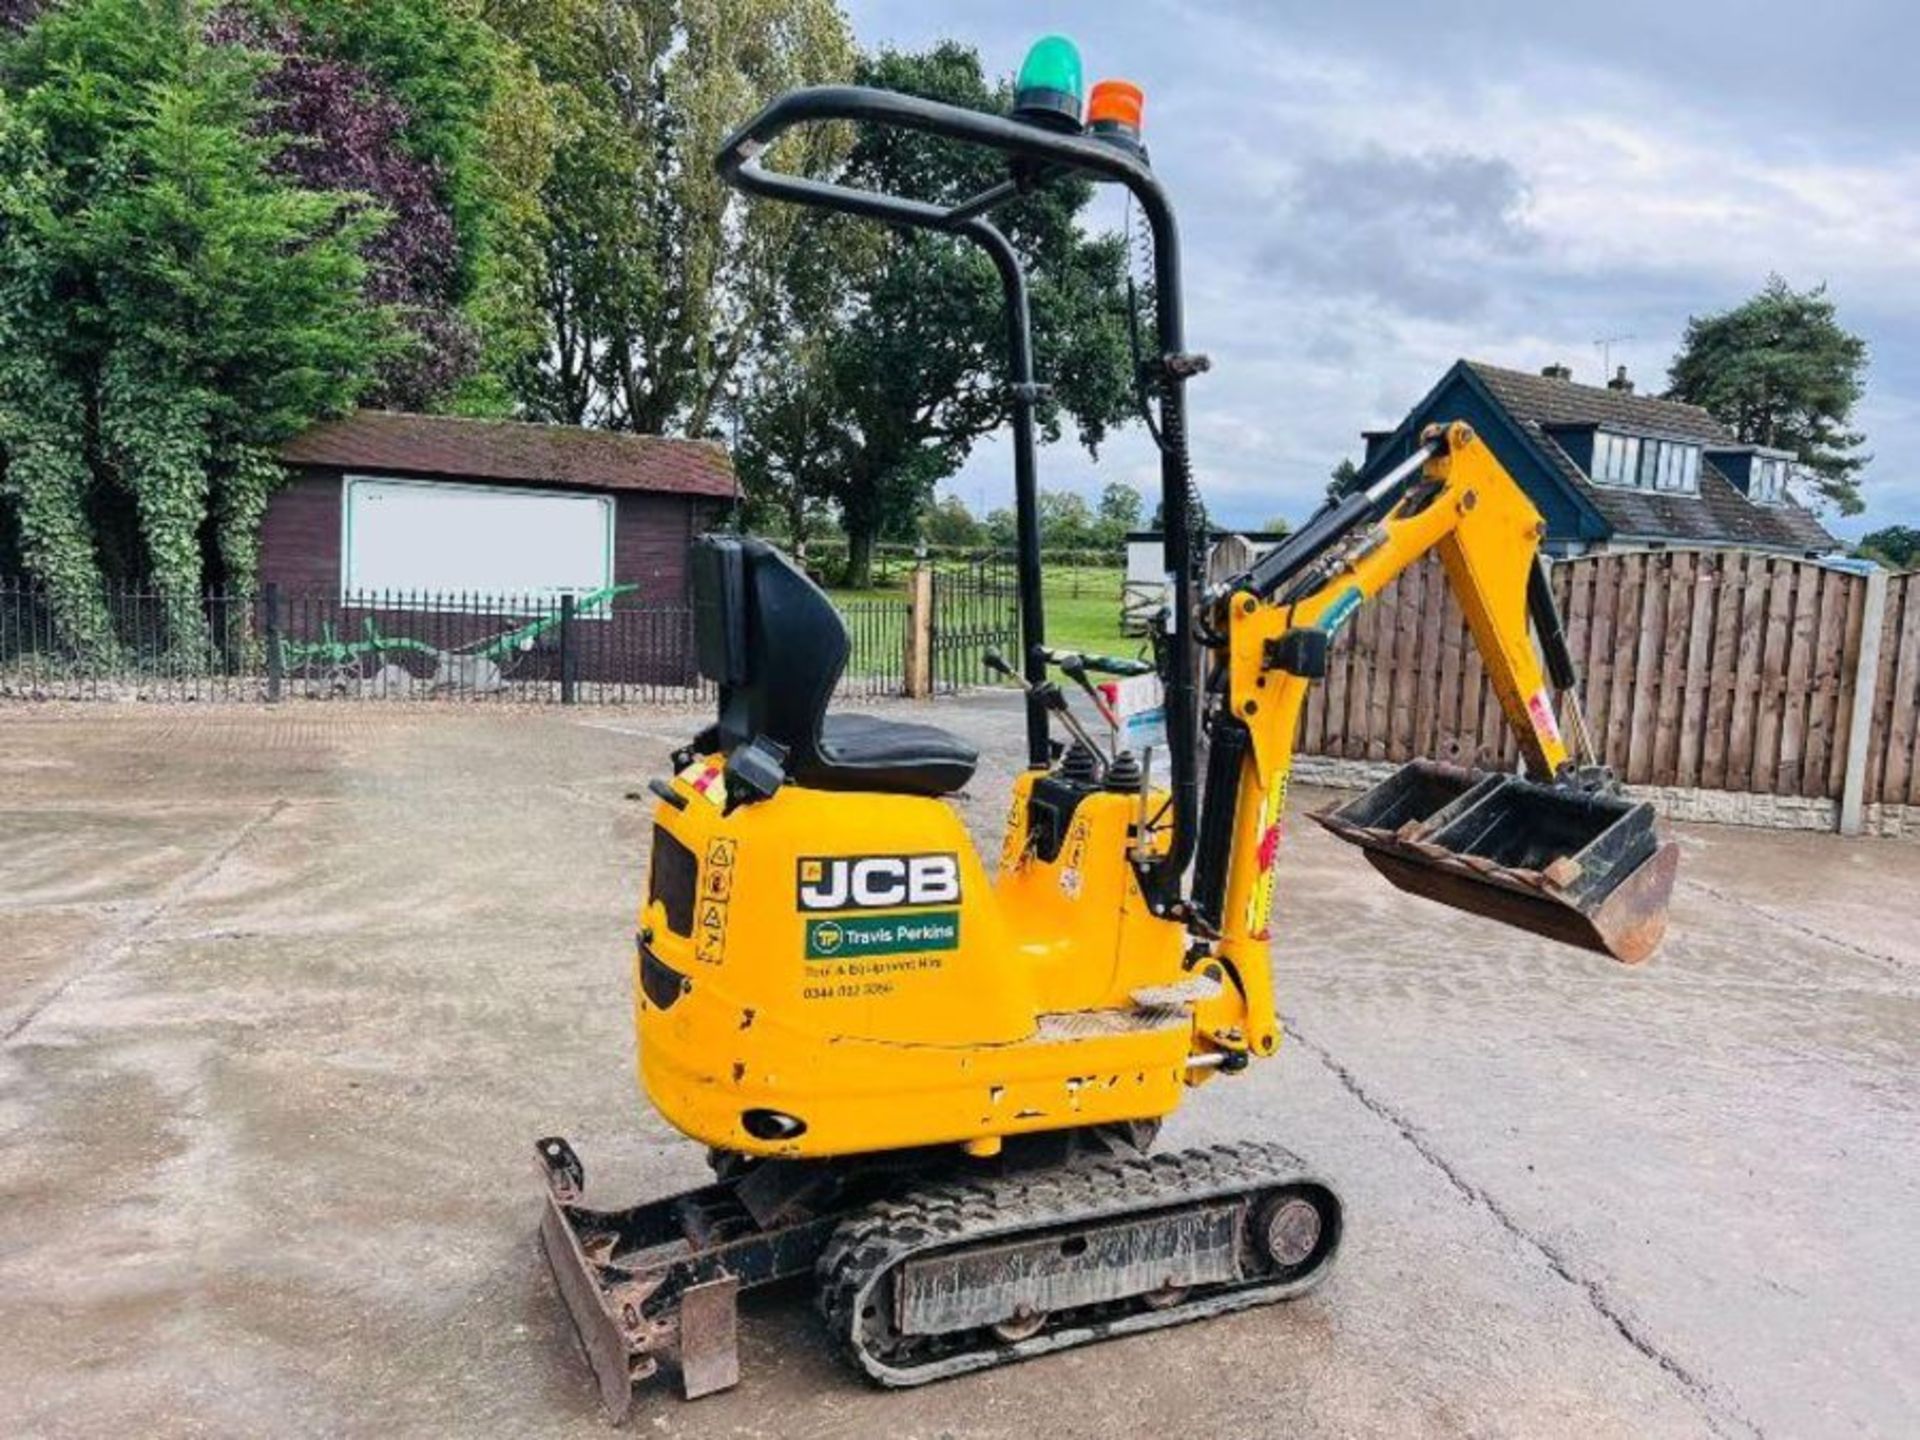 JCB MICRO DIGGER *YEAR 2019, ONLY 338 HOURS* C/W EXPANDING TRACKS - Image 11 of 16